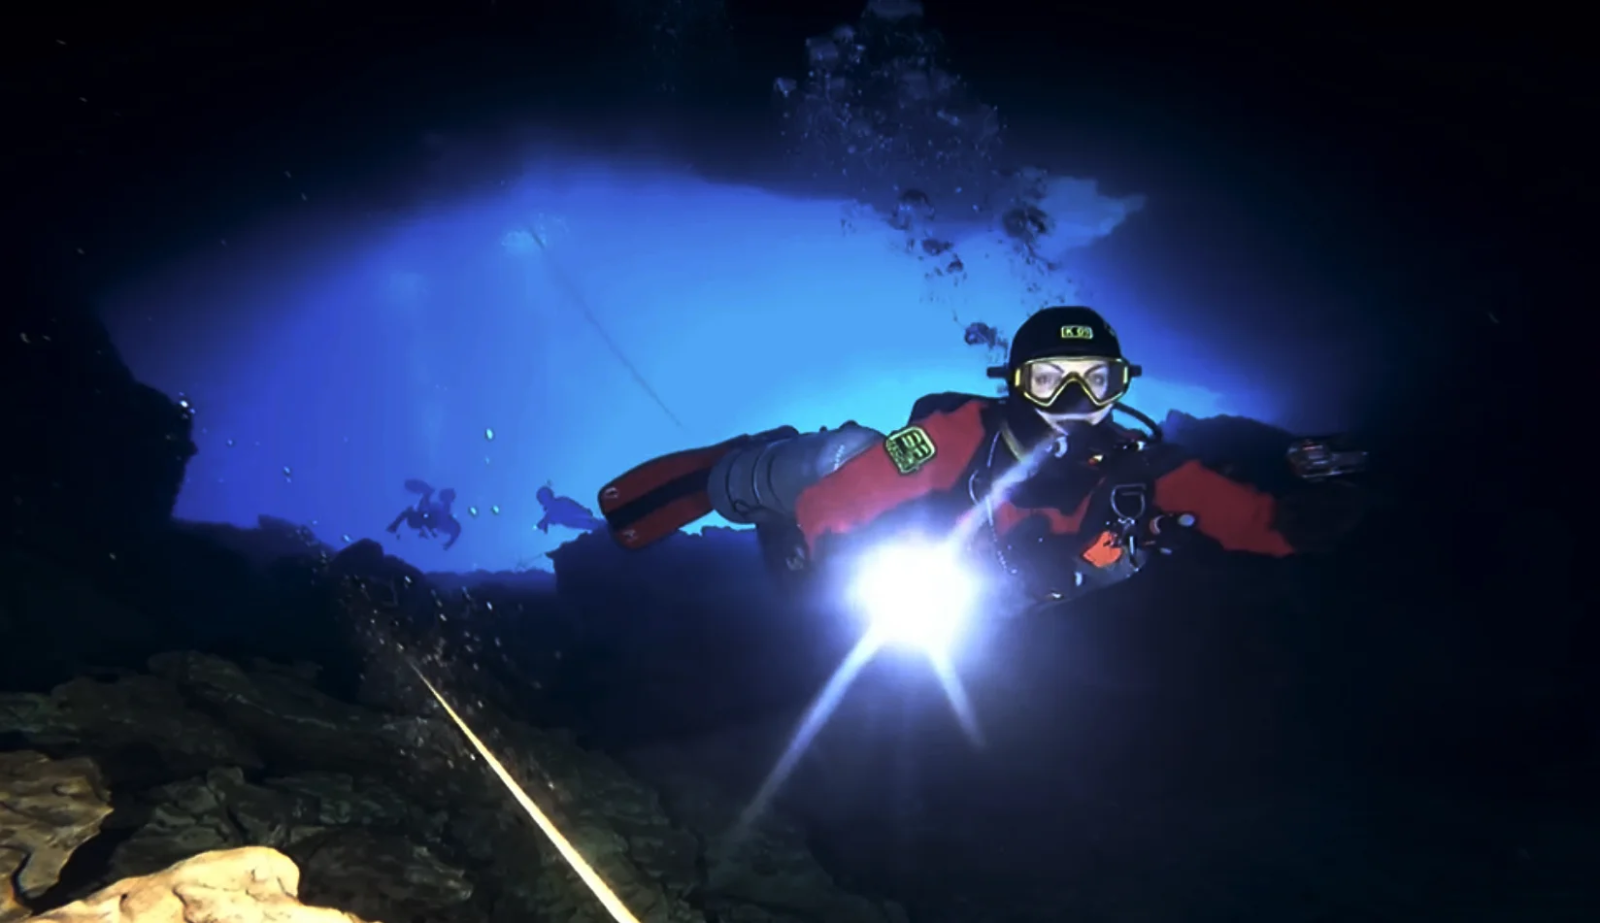 Lagoon Dudu, a journey into the mysterious world of cave diving